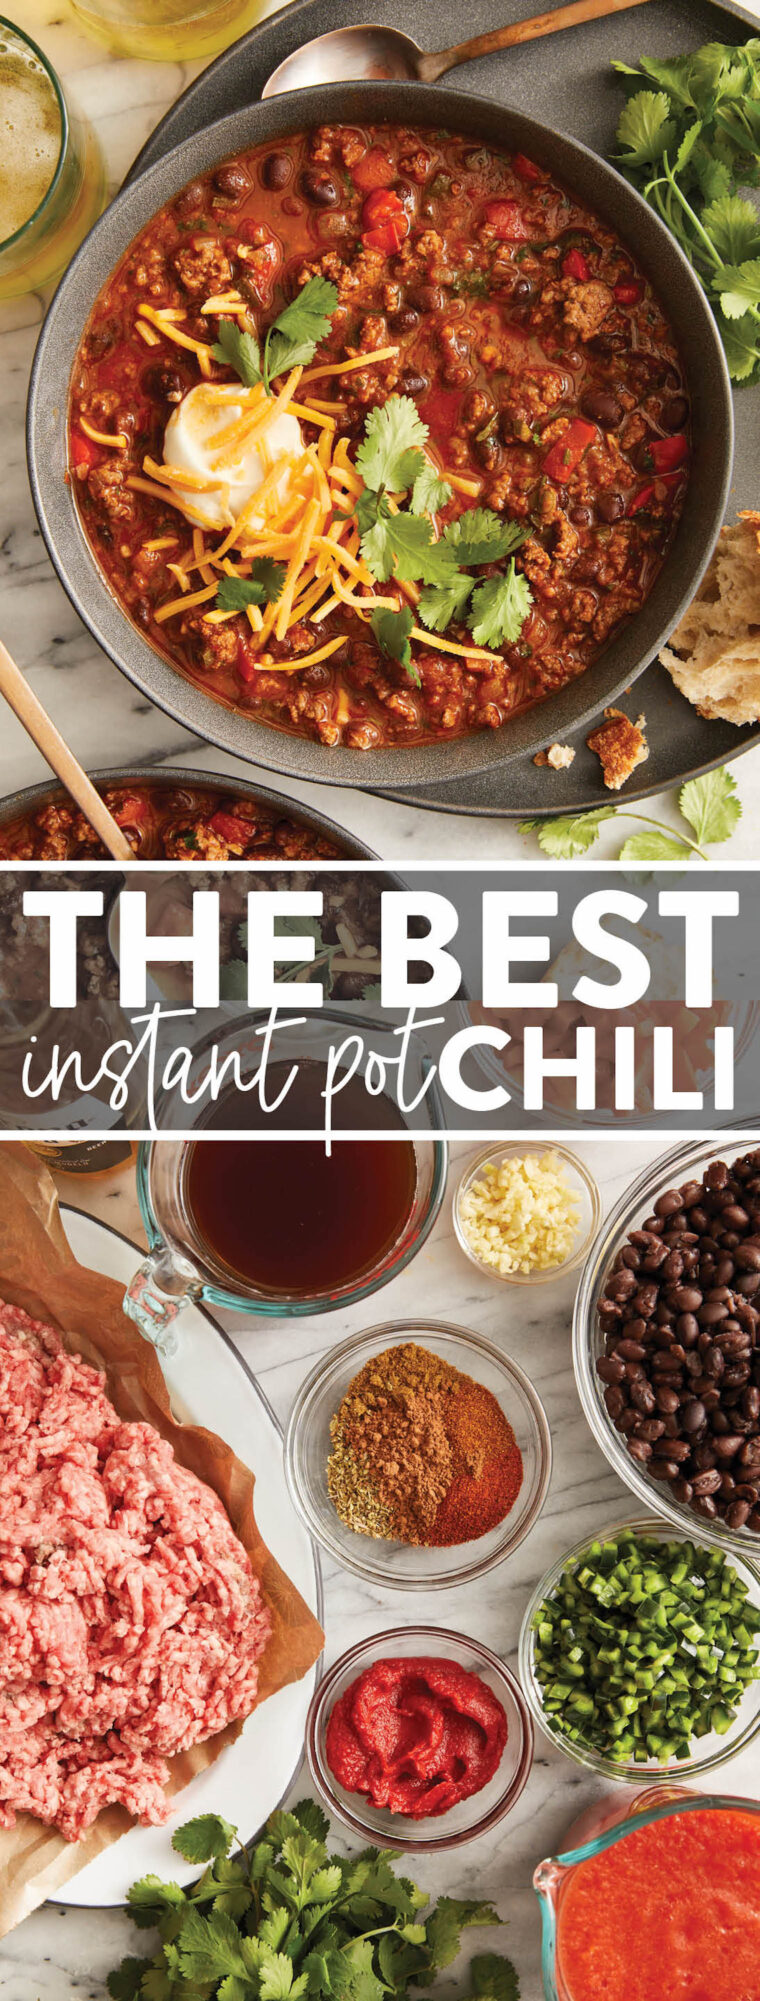 The Best Instant Pot Chili - Hands down THE BEST chili ever. Done in less than 1 hour with no babysitting, no fuss! So easy and so flavorful!